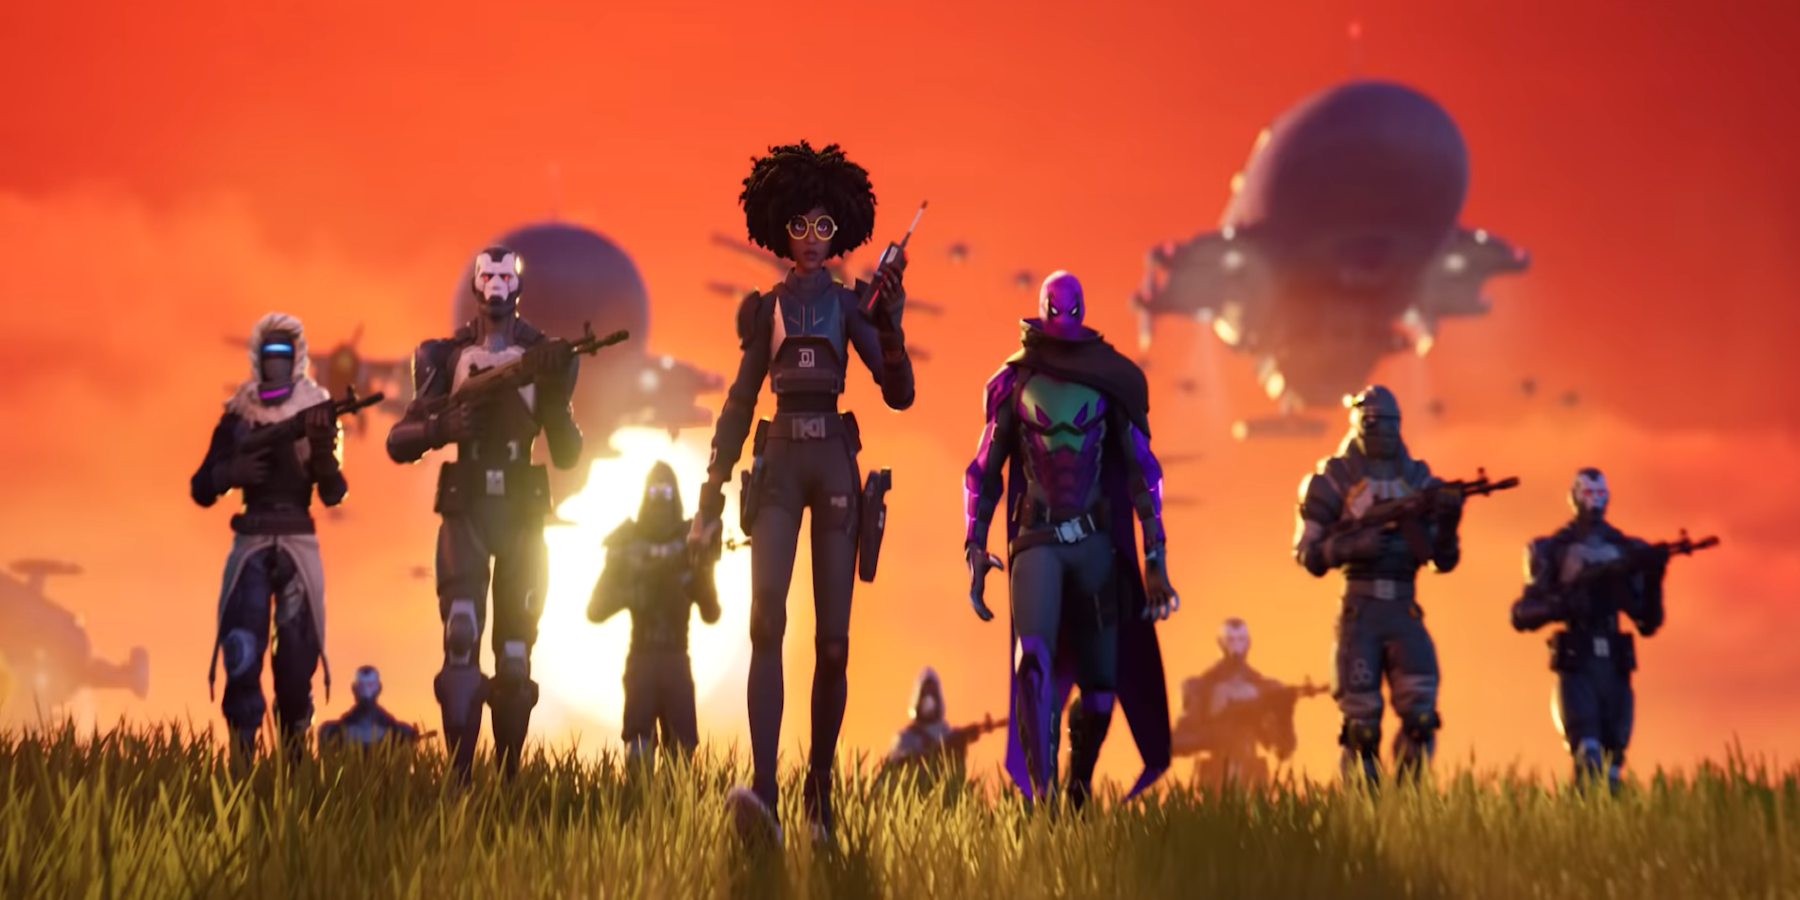 When Will Fortnite Season 3 Begin? Here's What We Know Thus Far